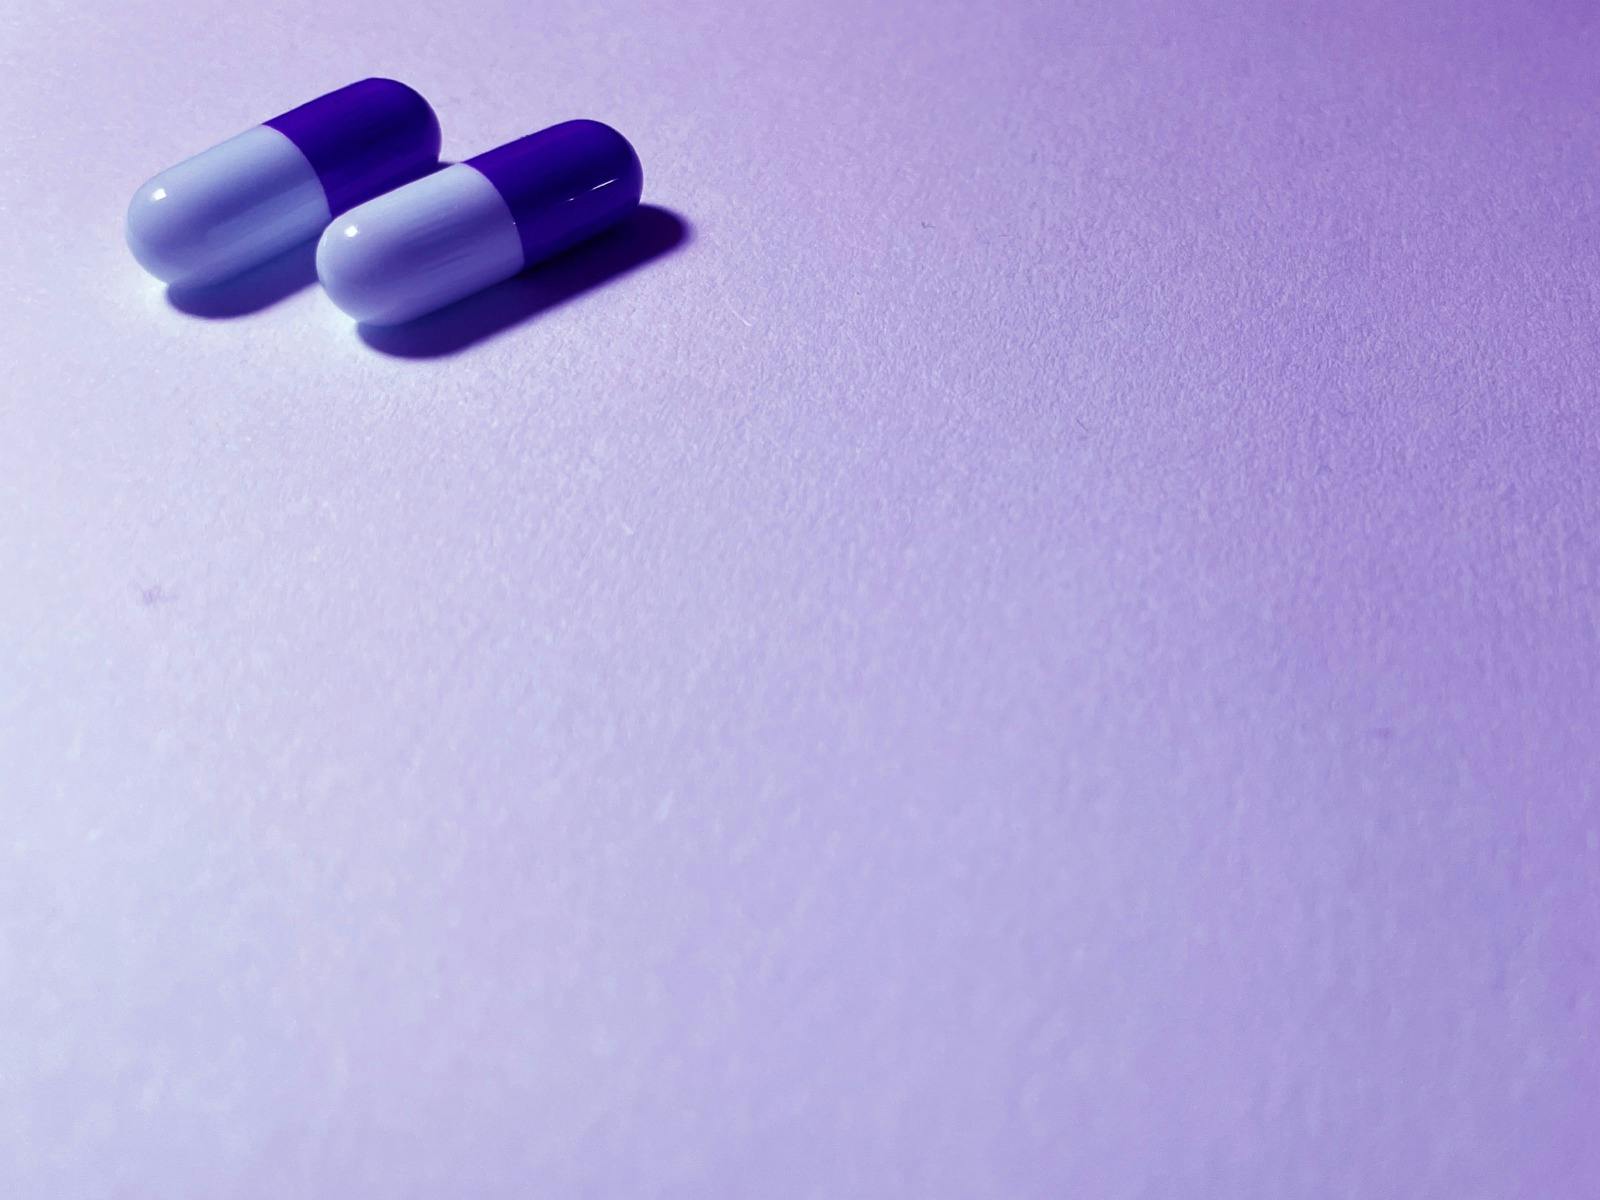 A photo of 2 purple tablets